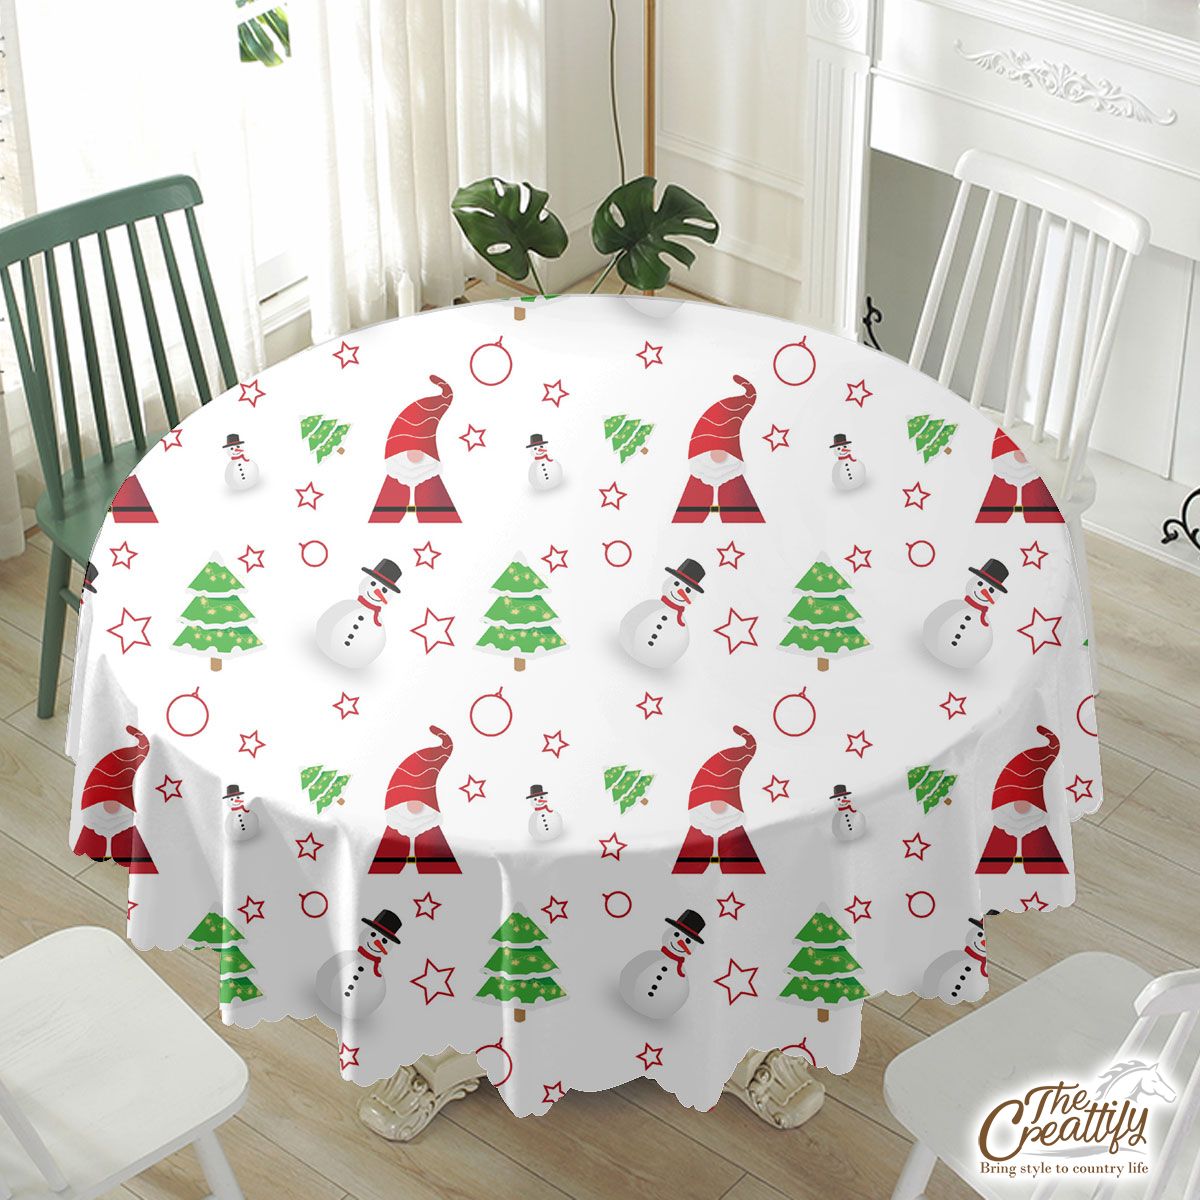 Santa Claus, Snowman Clipart And Pine Tree Silhouette Seamless Pattern Waterproof Tablecloth